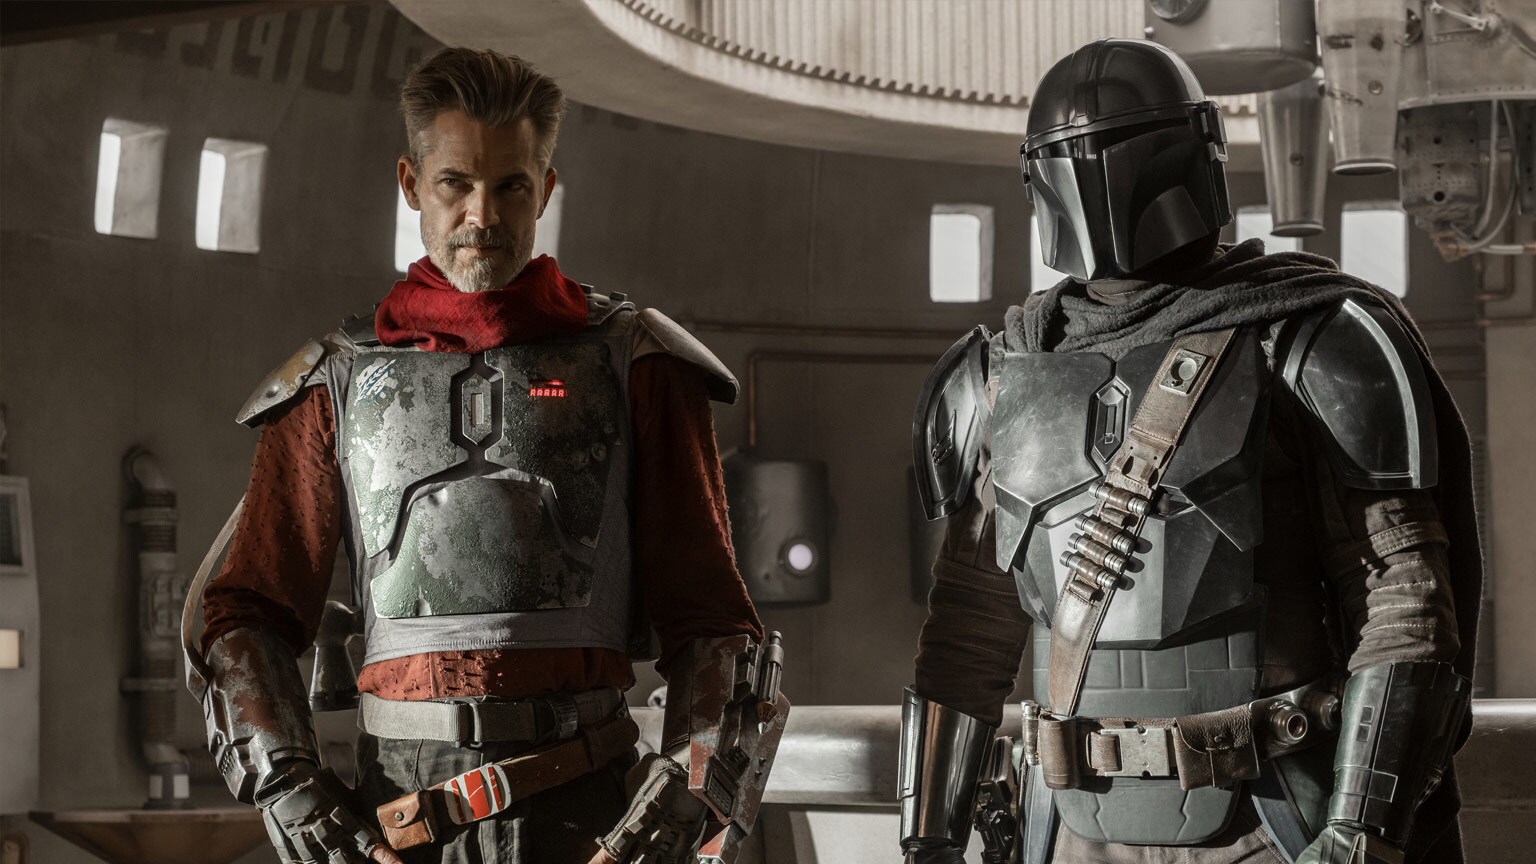 Bounty Hunting Highlights: 5 of Our Favorite Moments from The Mandalorian – “Chapter 9: The Marshal”